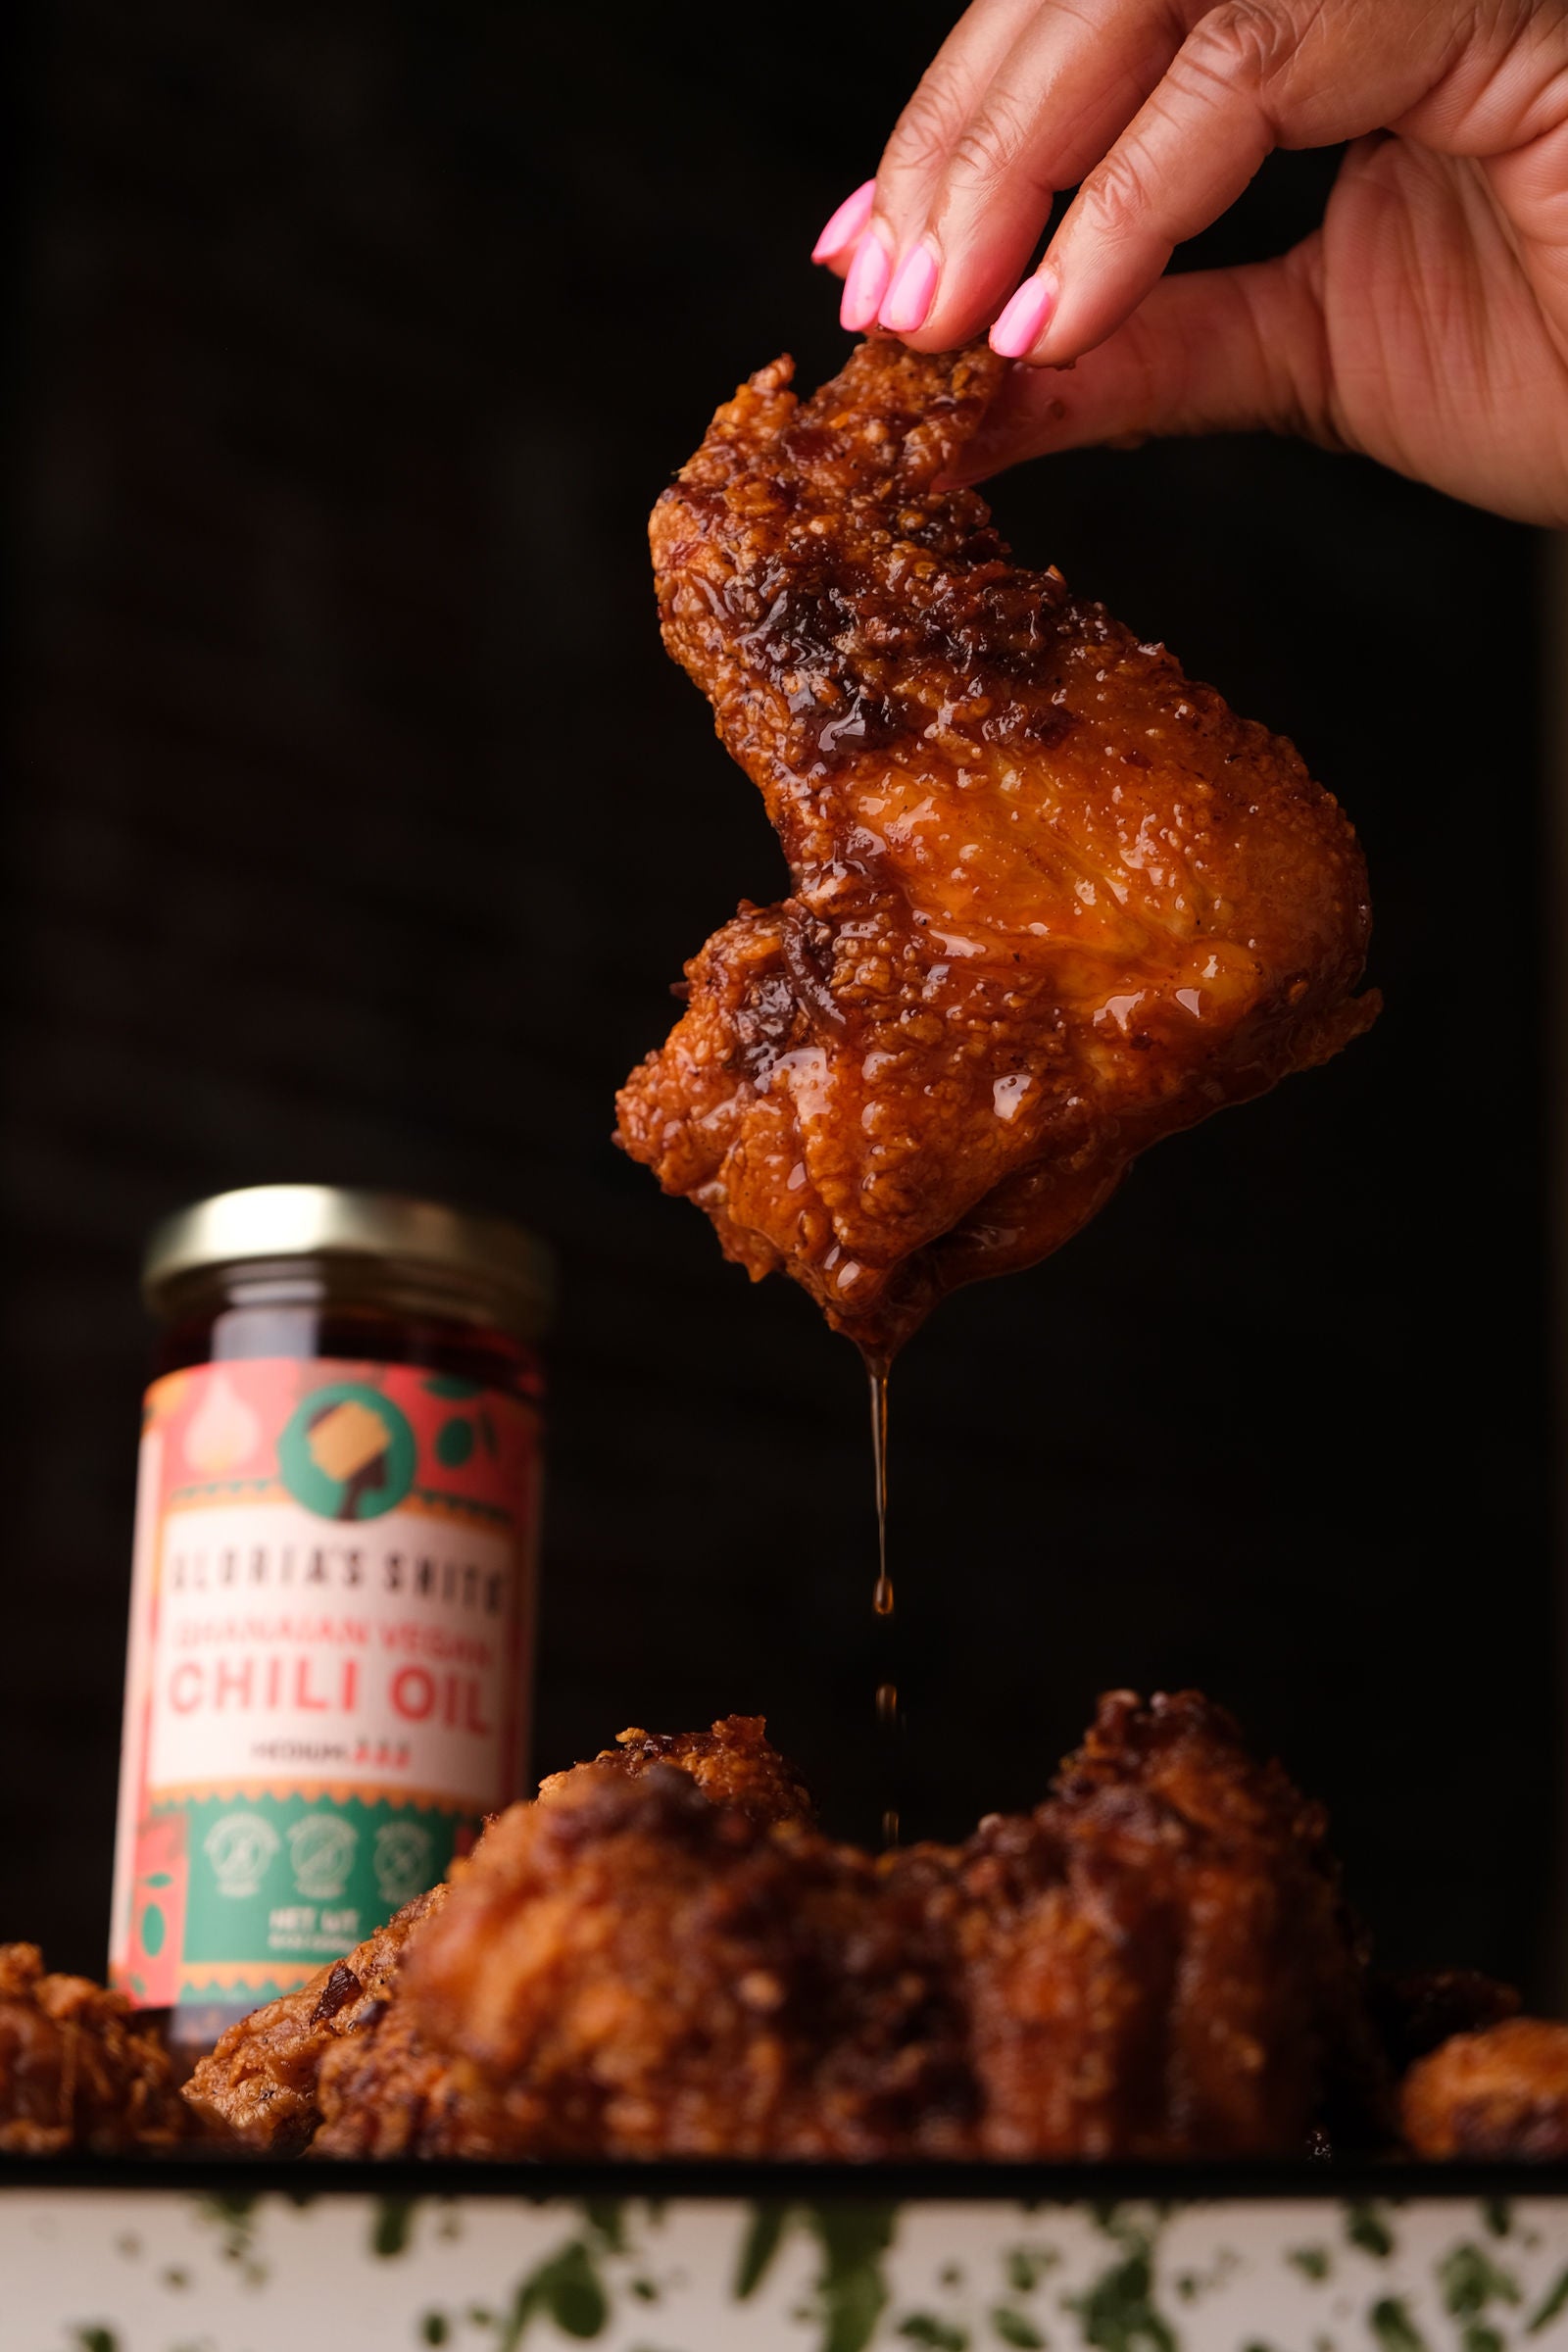 Crispy Fried Chicken Wings, dipped in chili oil, Ghana shito.